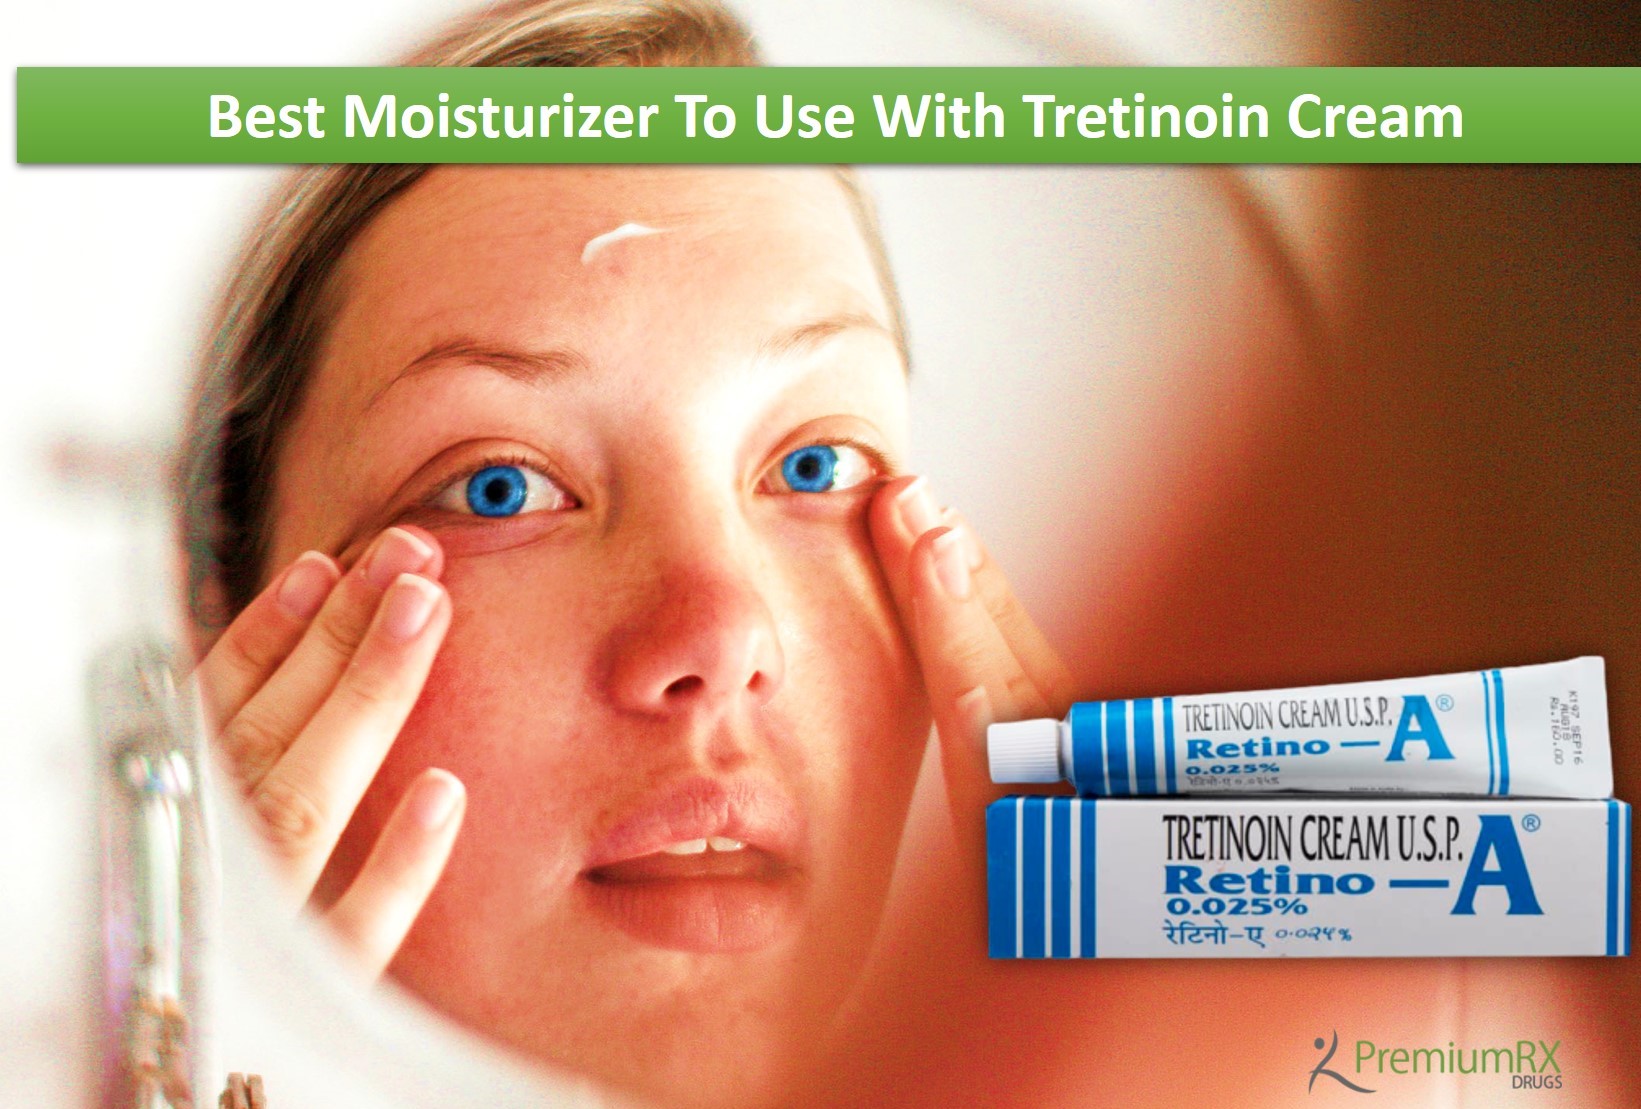 Moisturizer To Use With Tretinoin